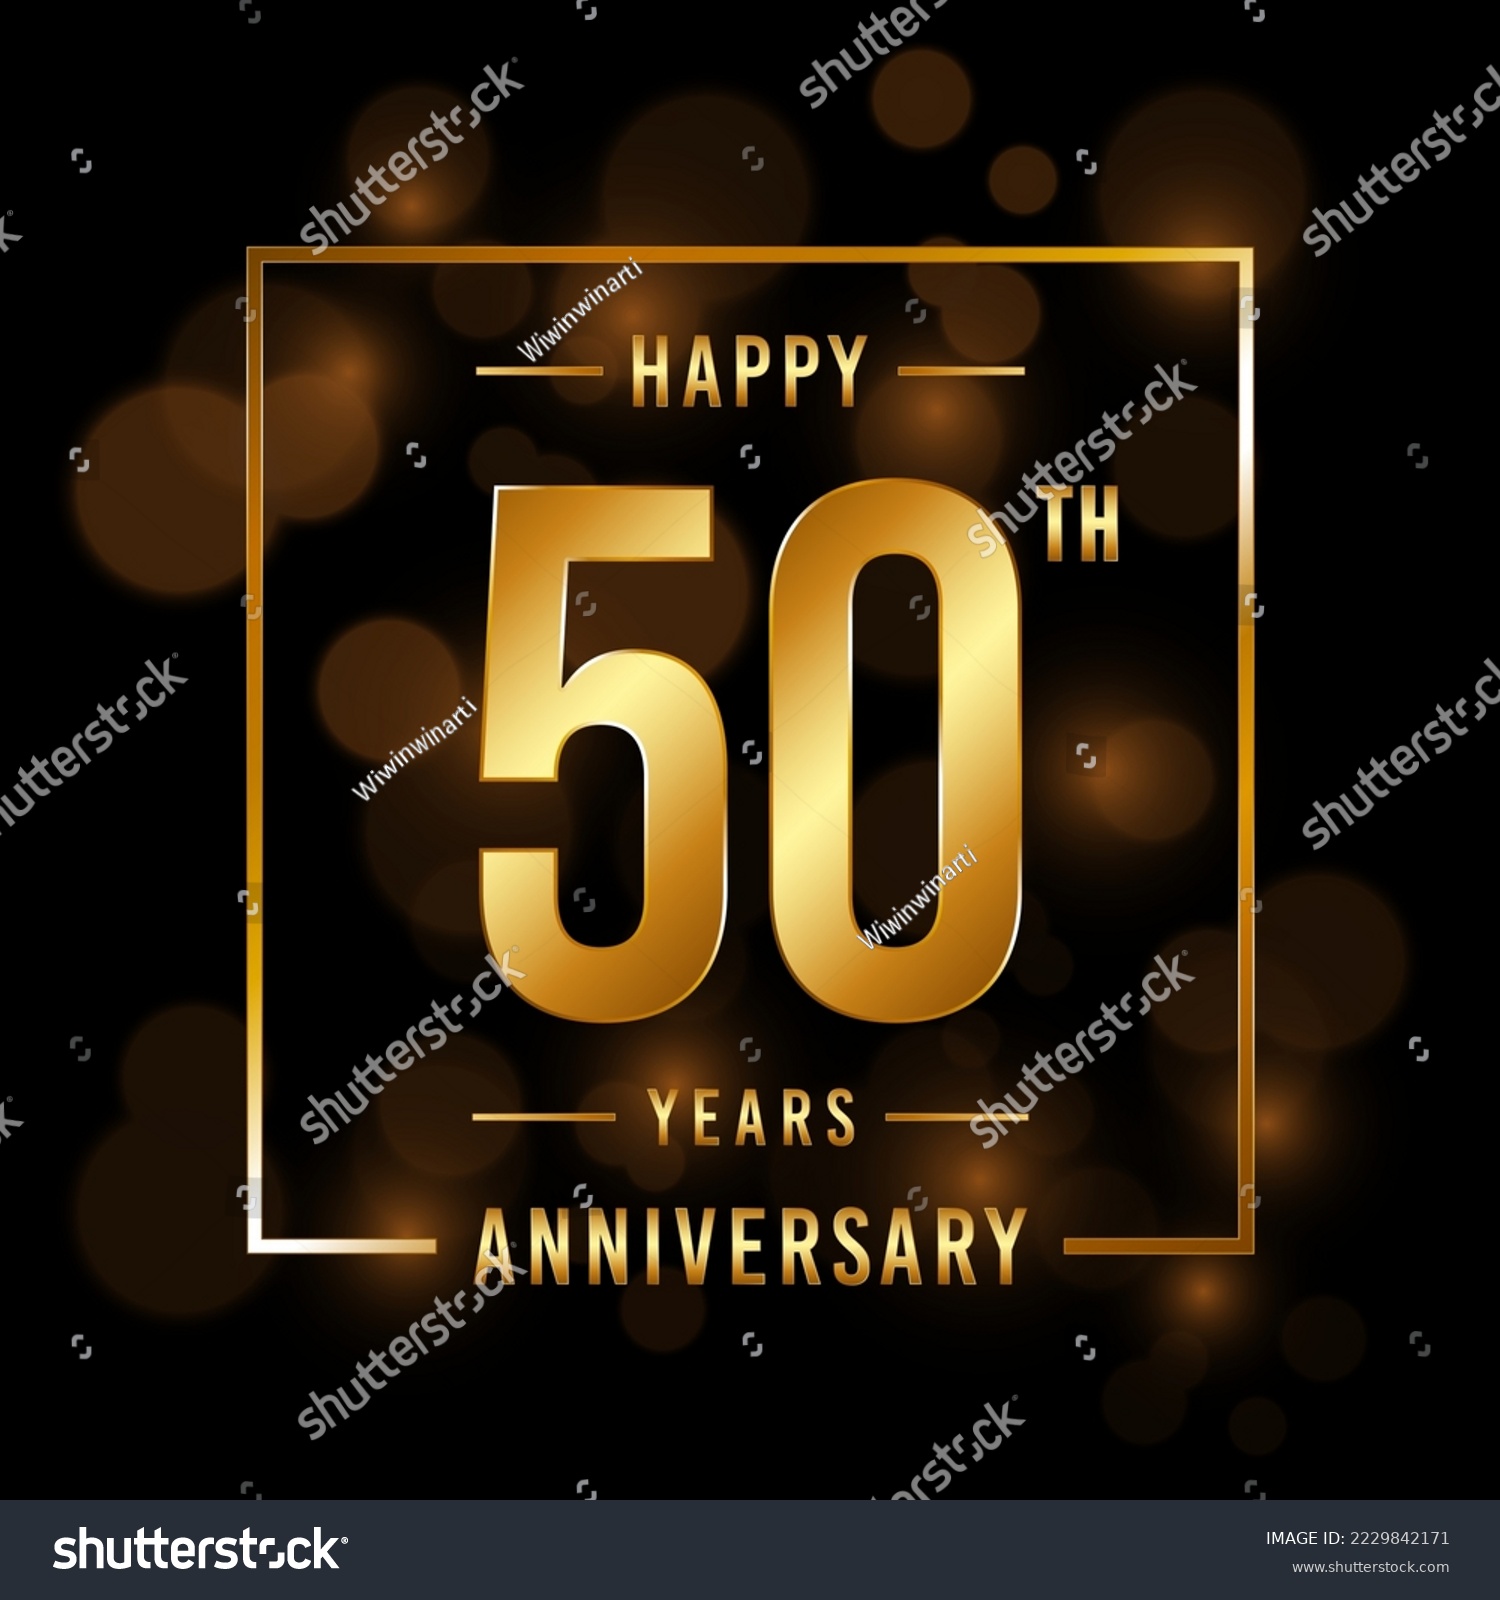 SVG of 50th Anniversary. Anniversary template design with golden font for celebration events, weddings, invitations and greeting cards. Vector illustration svg